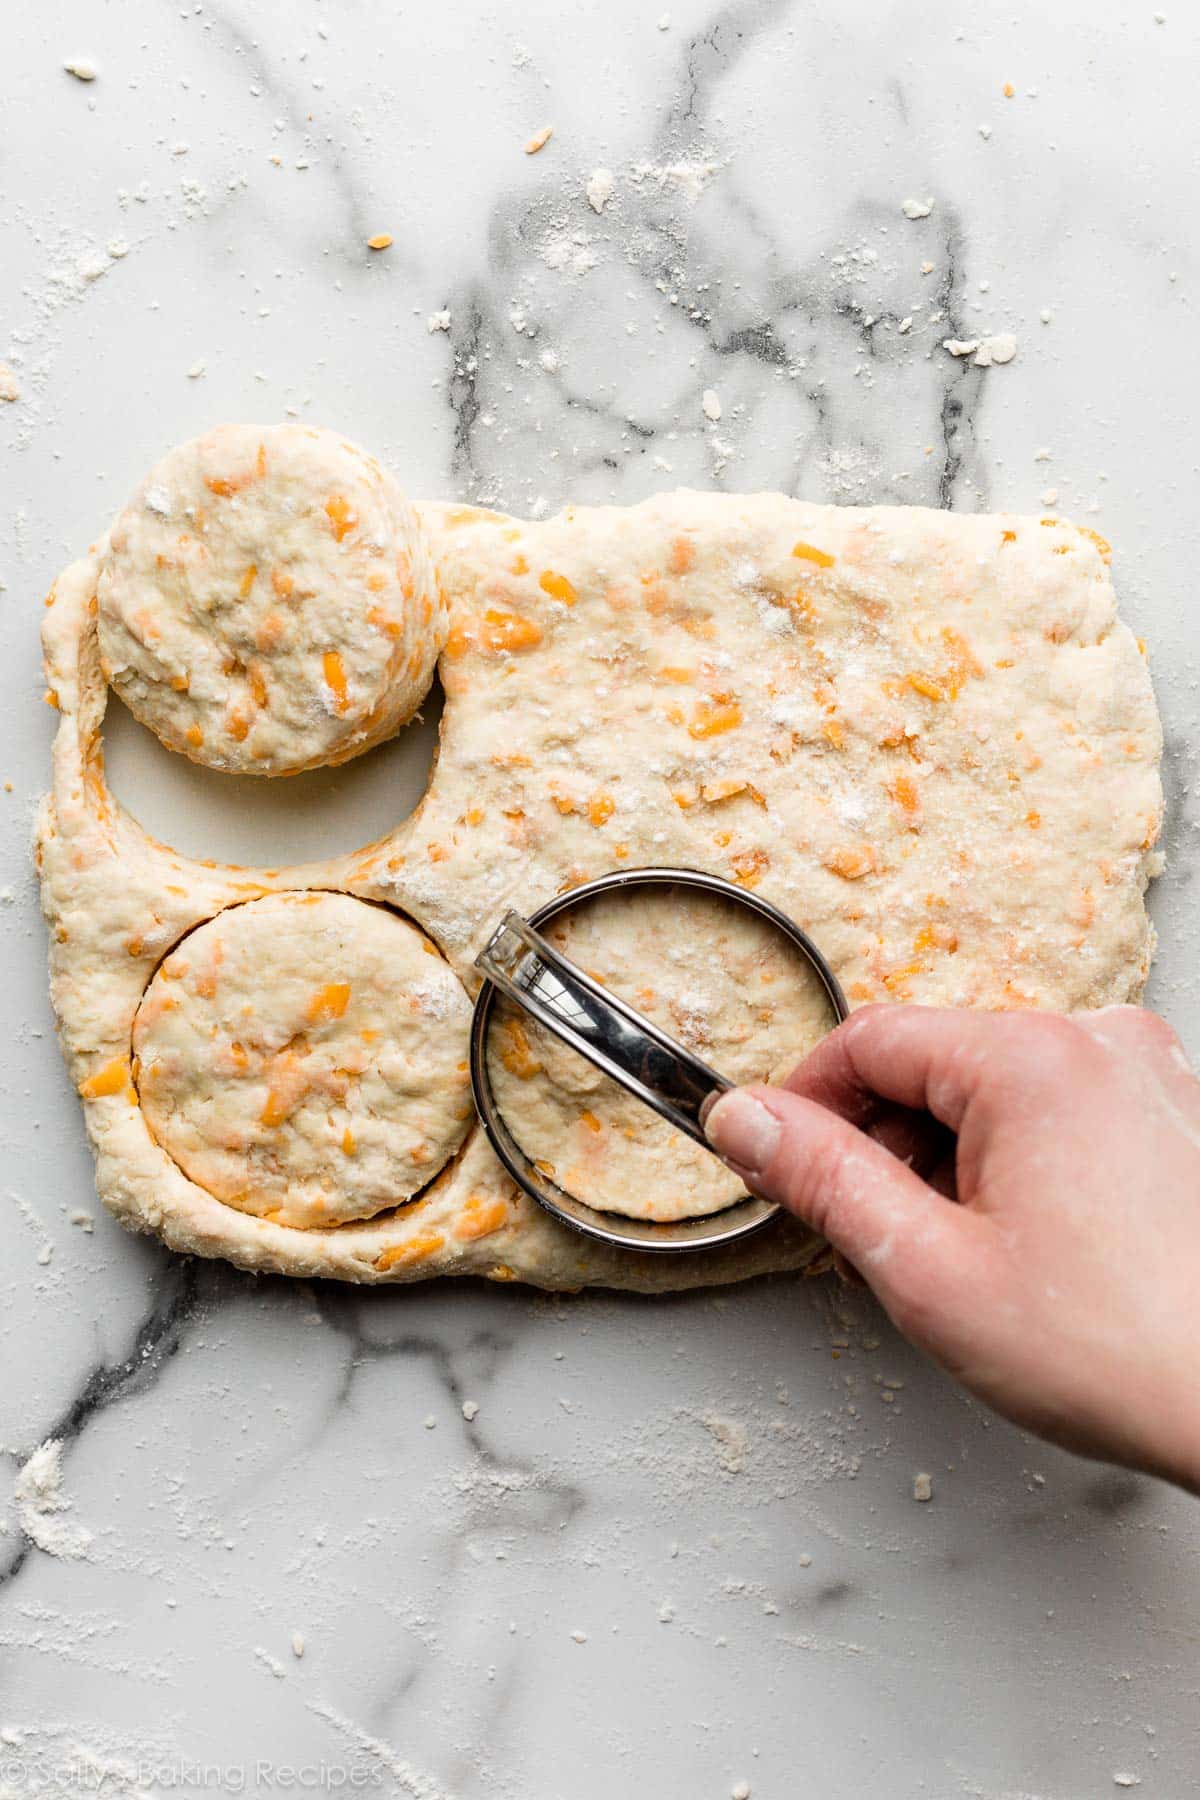 cheese biscuit dough on countertop with hand using cutter to shape into rounds.